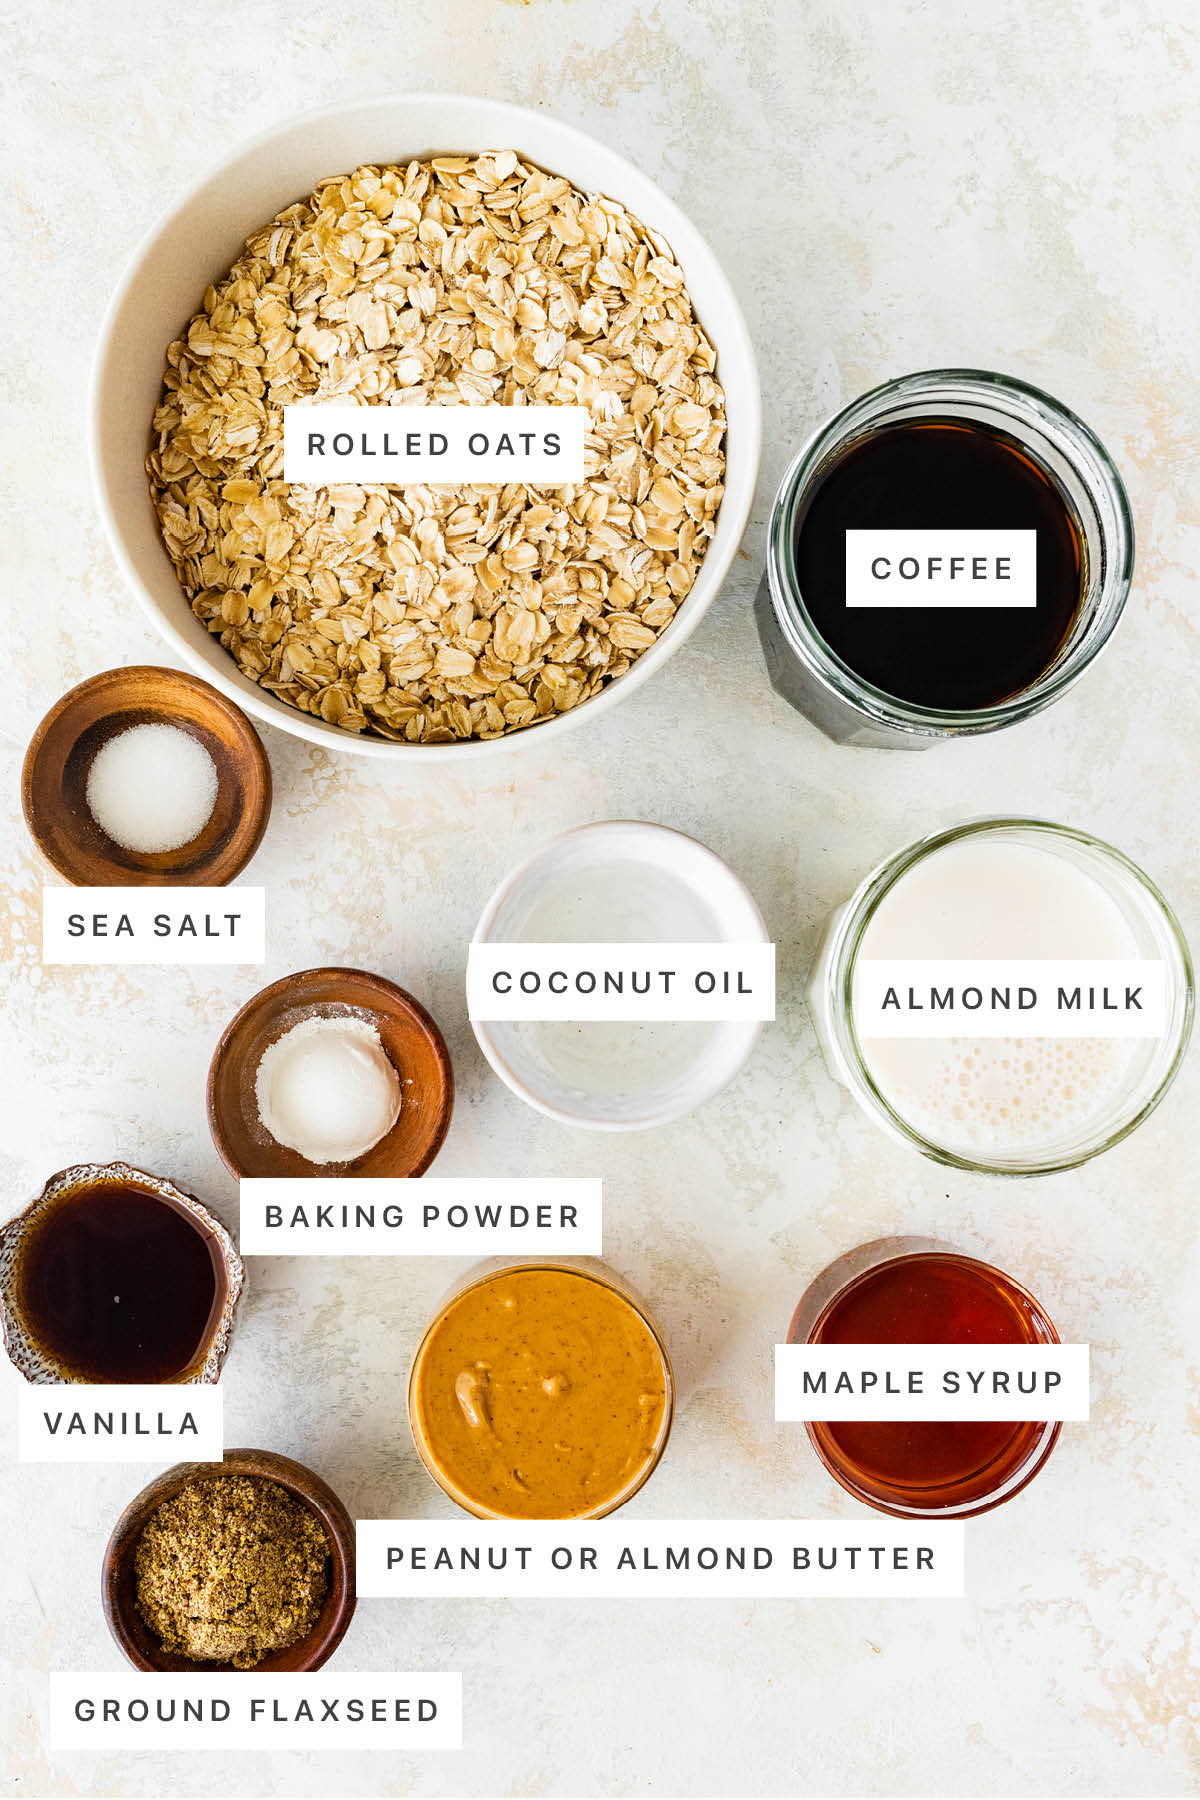 Ingredients measured out to make Coffee Baked Oatmeal: rolled oats, coffee, sea salt, coconut oil, almond milk, baking powder, vanilla, peanut or almond butter, maple syrup and ground flaxseed.